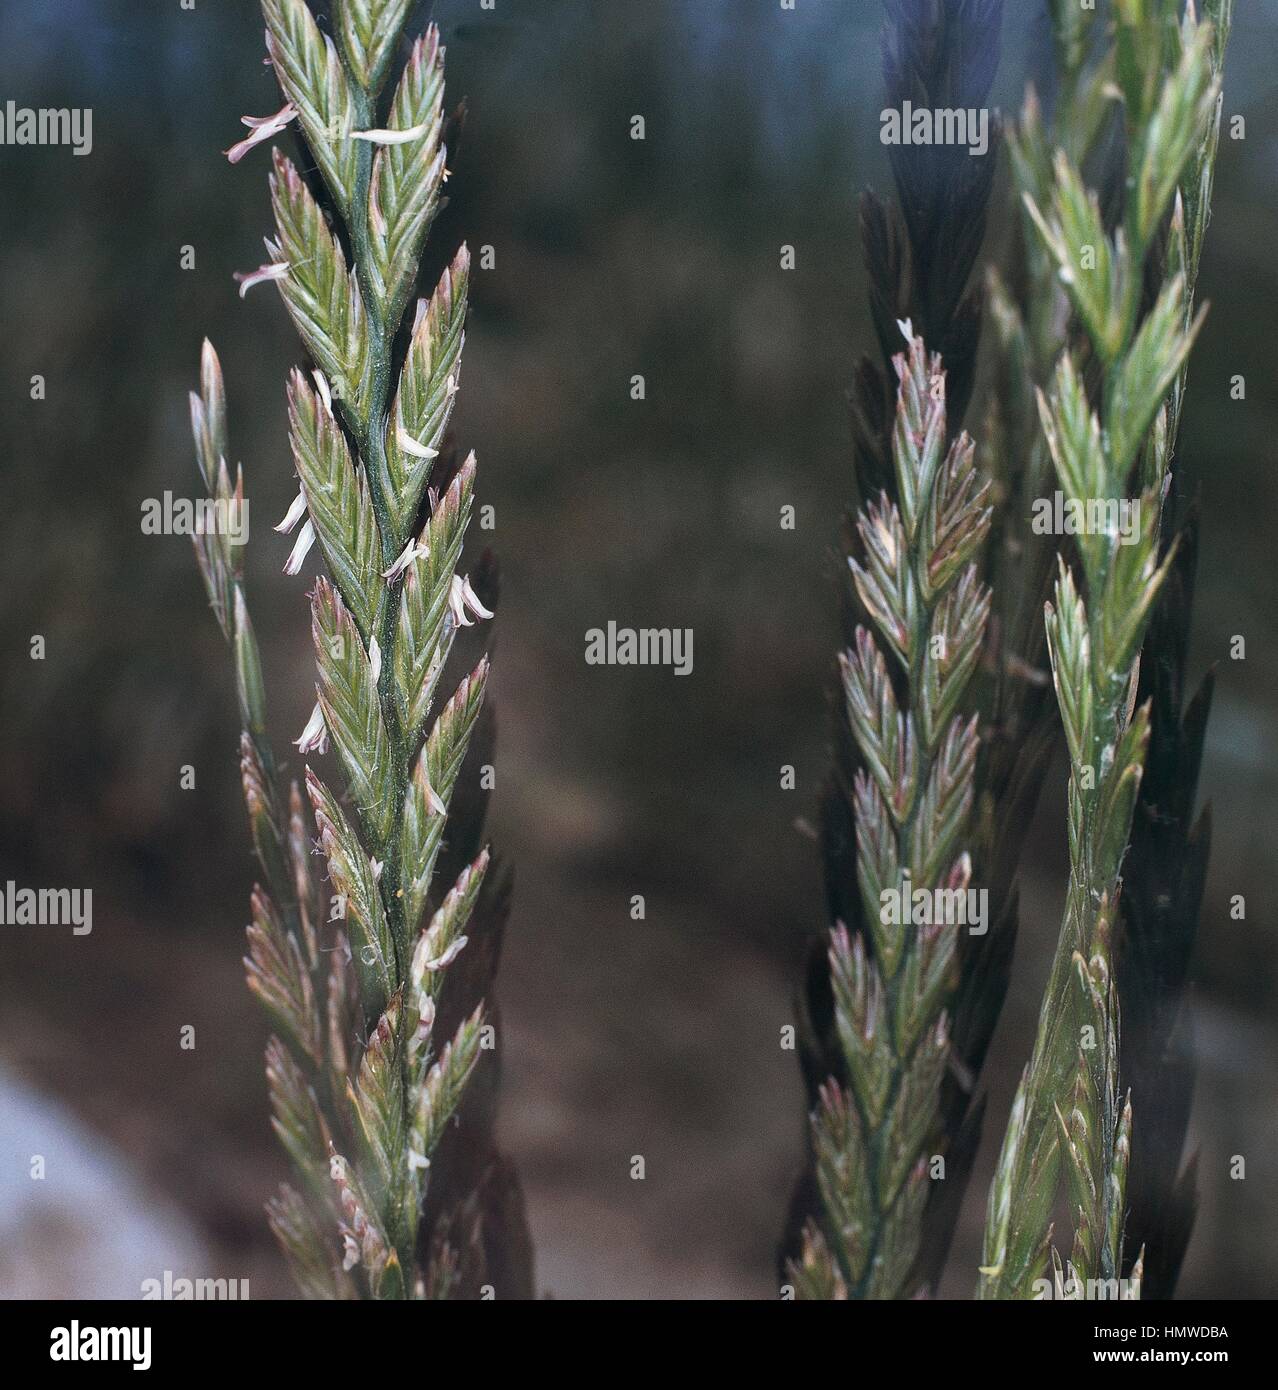 Couch grass flower spikes (Elytrigia repens), Poaceae. Stock Photo